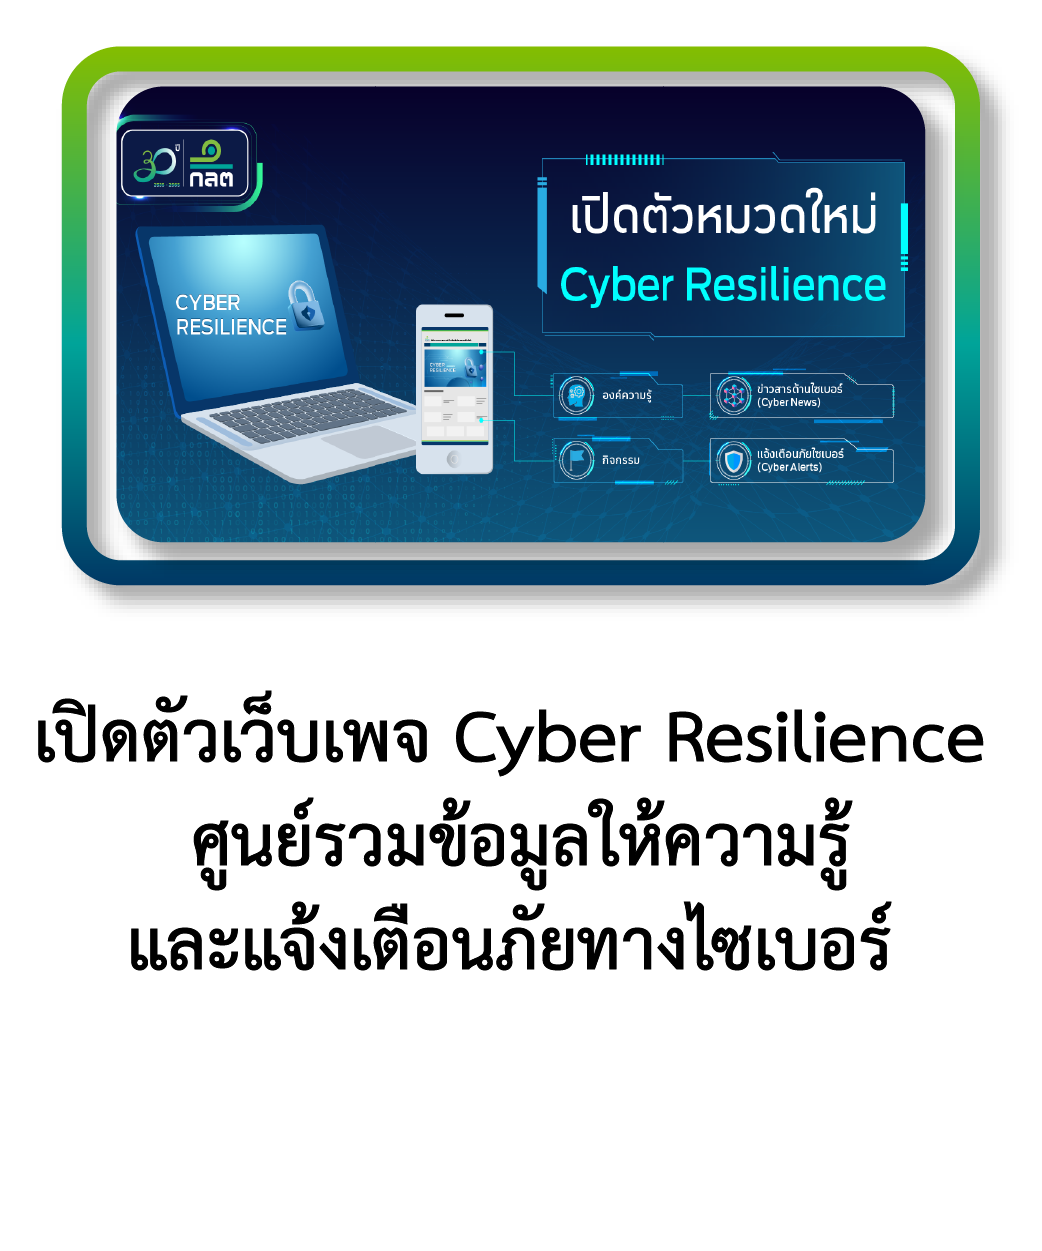 cyber resilience